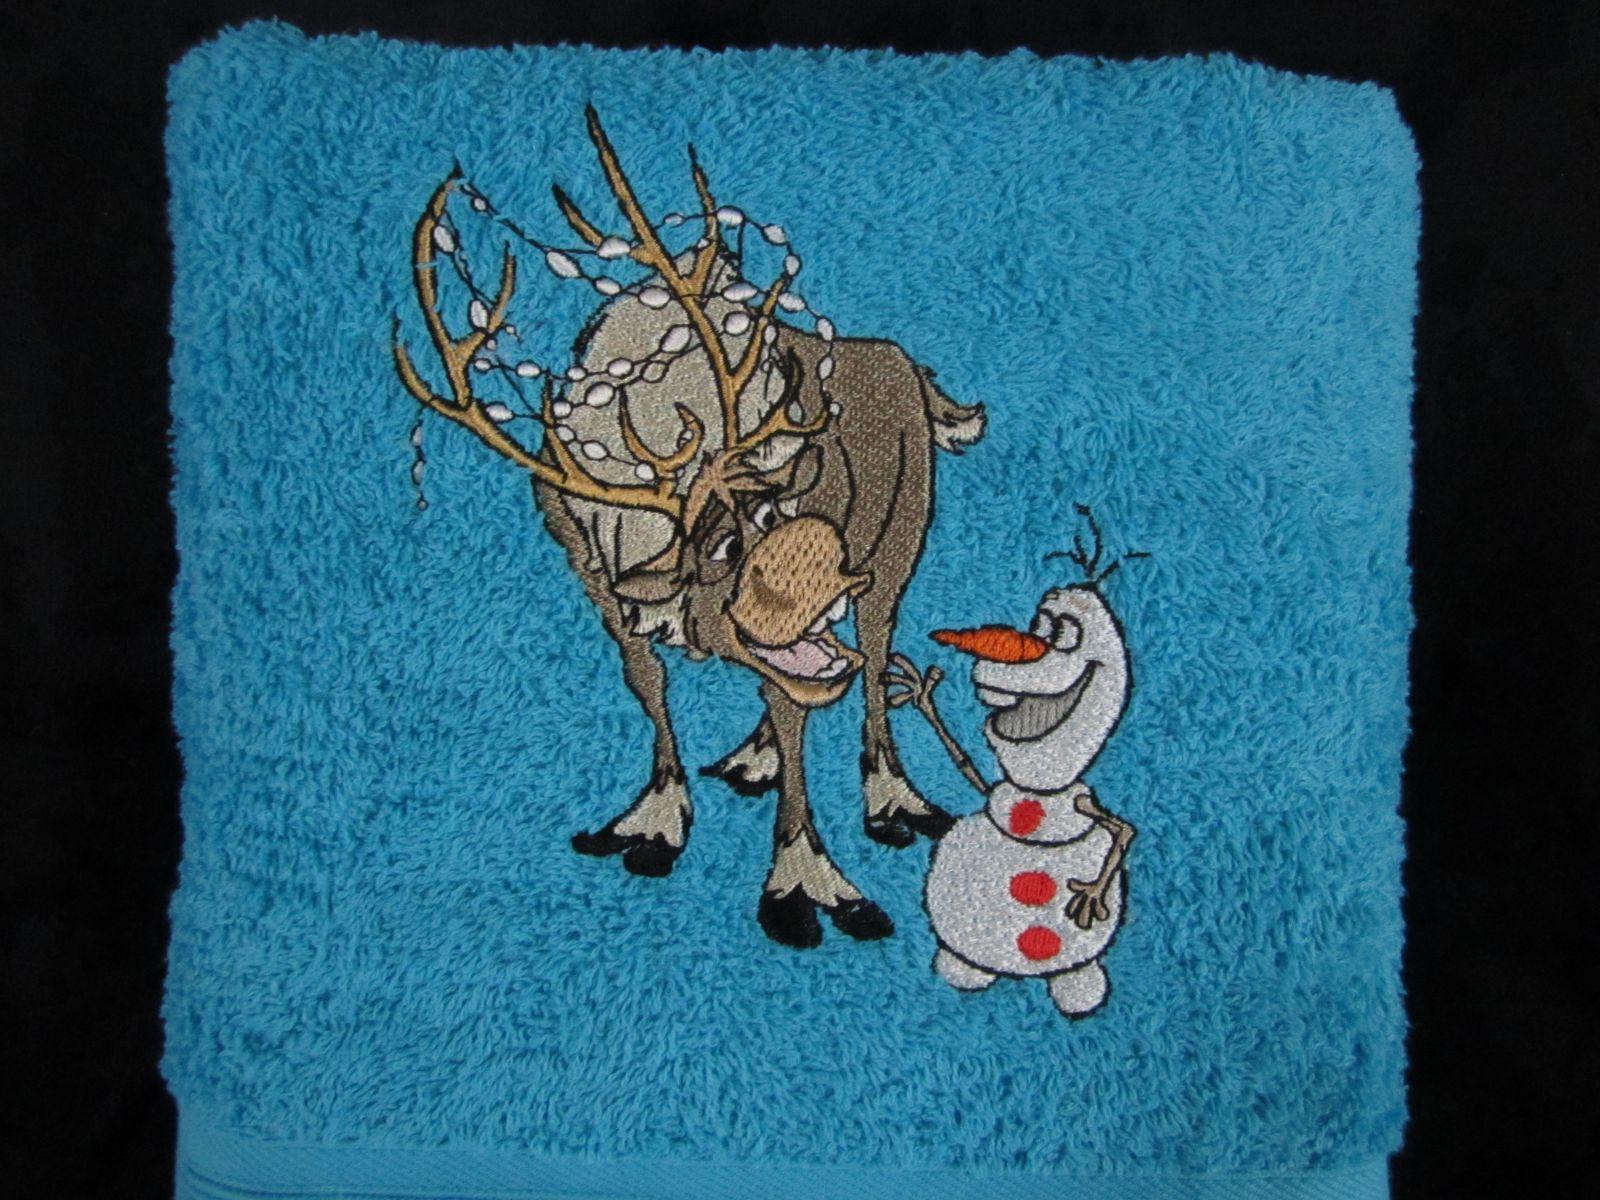 Sven and Olaf embroidered at towel